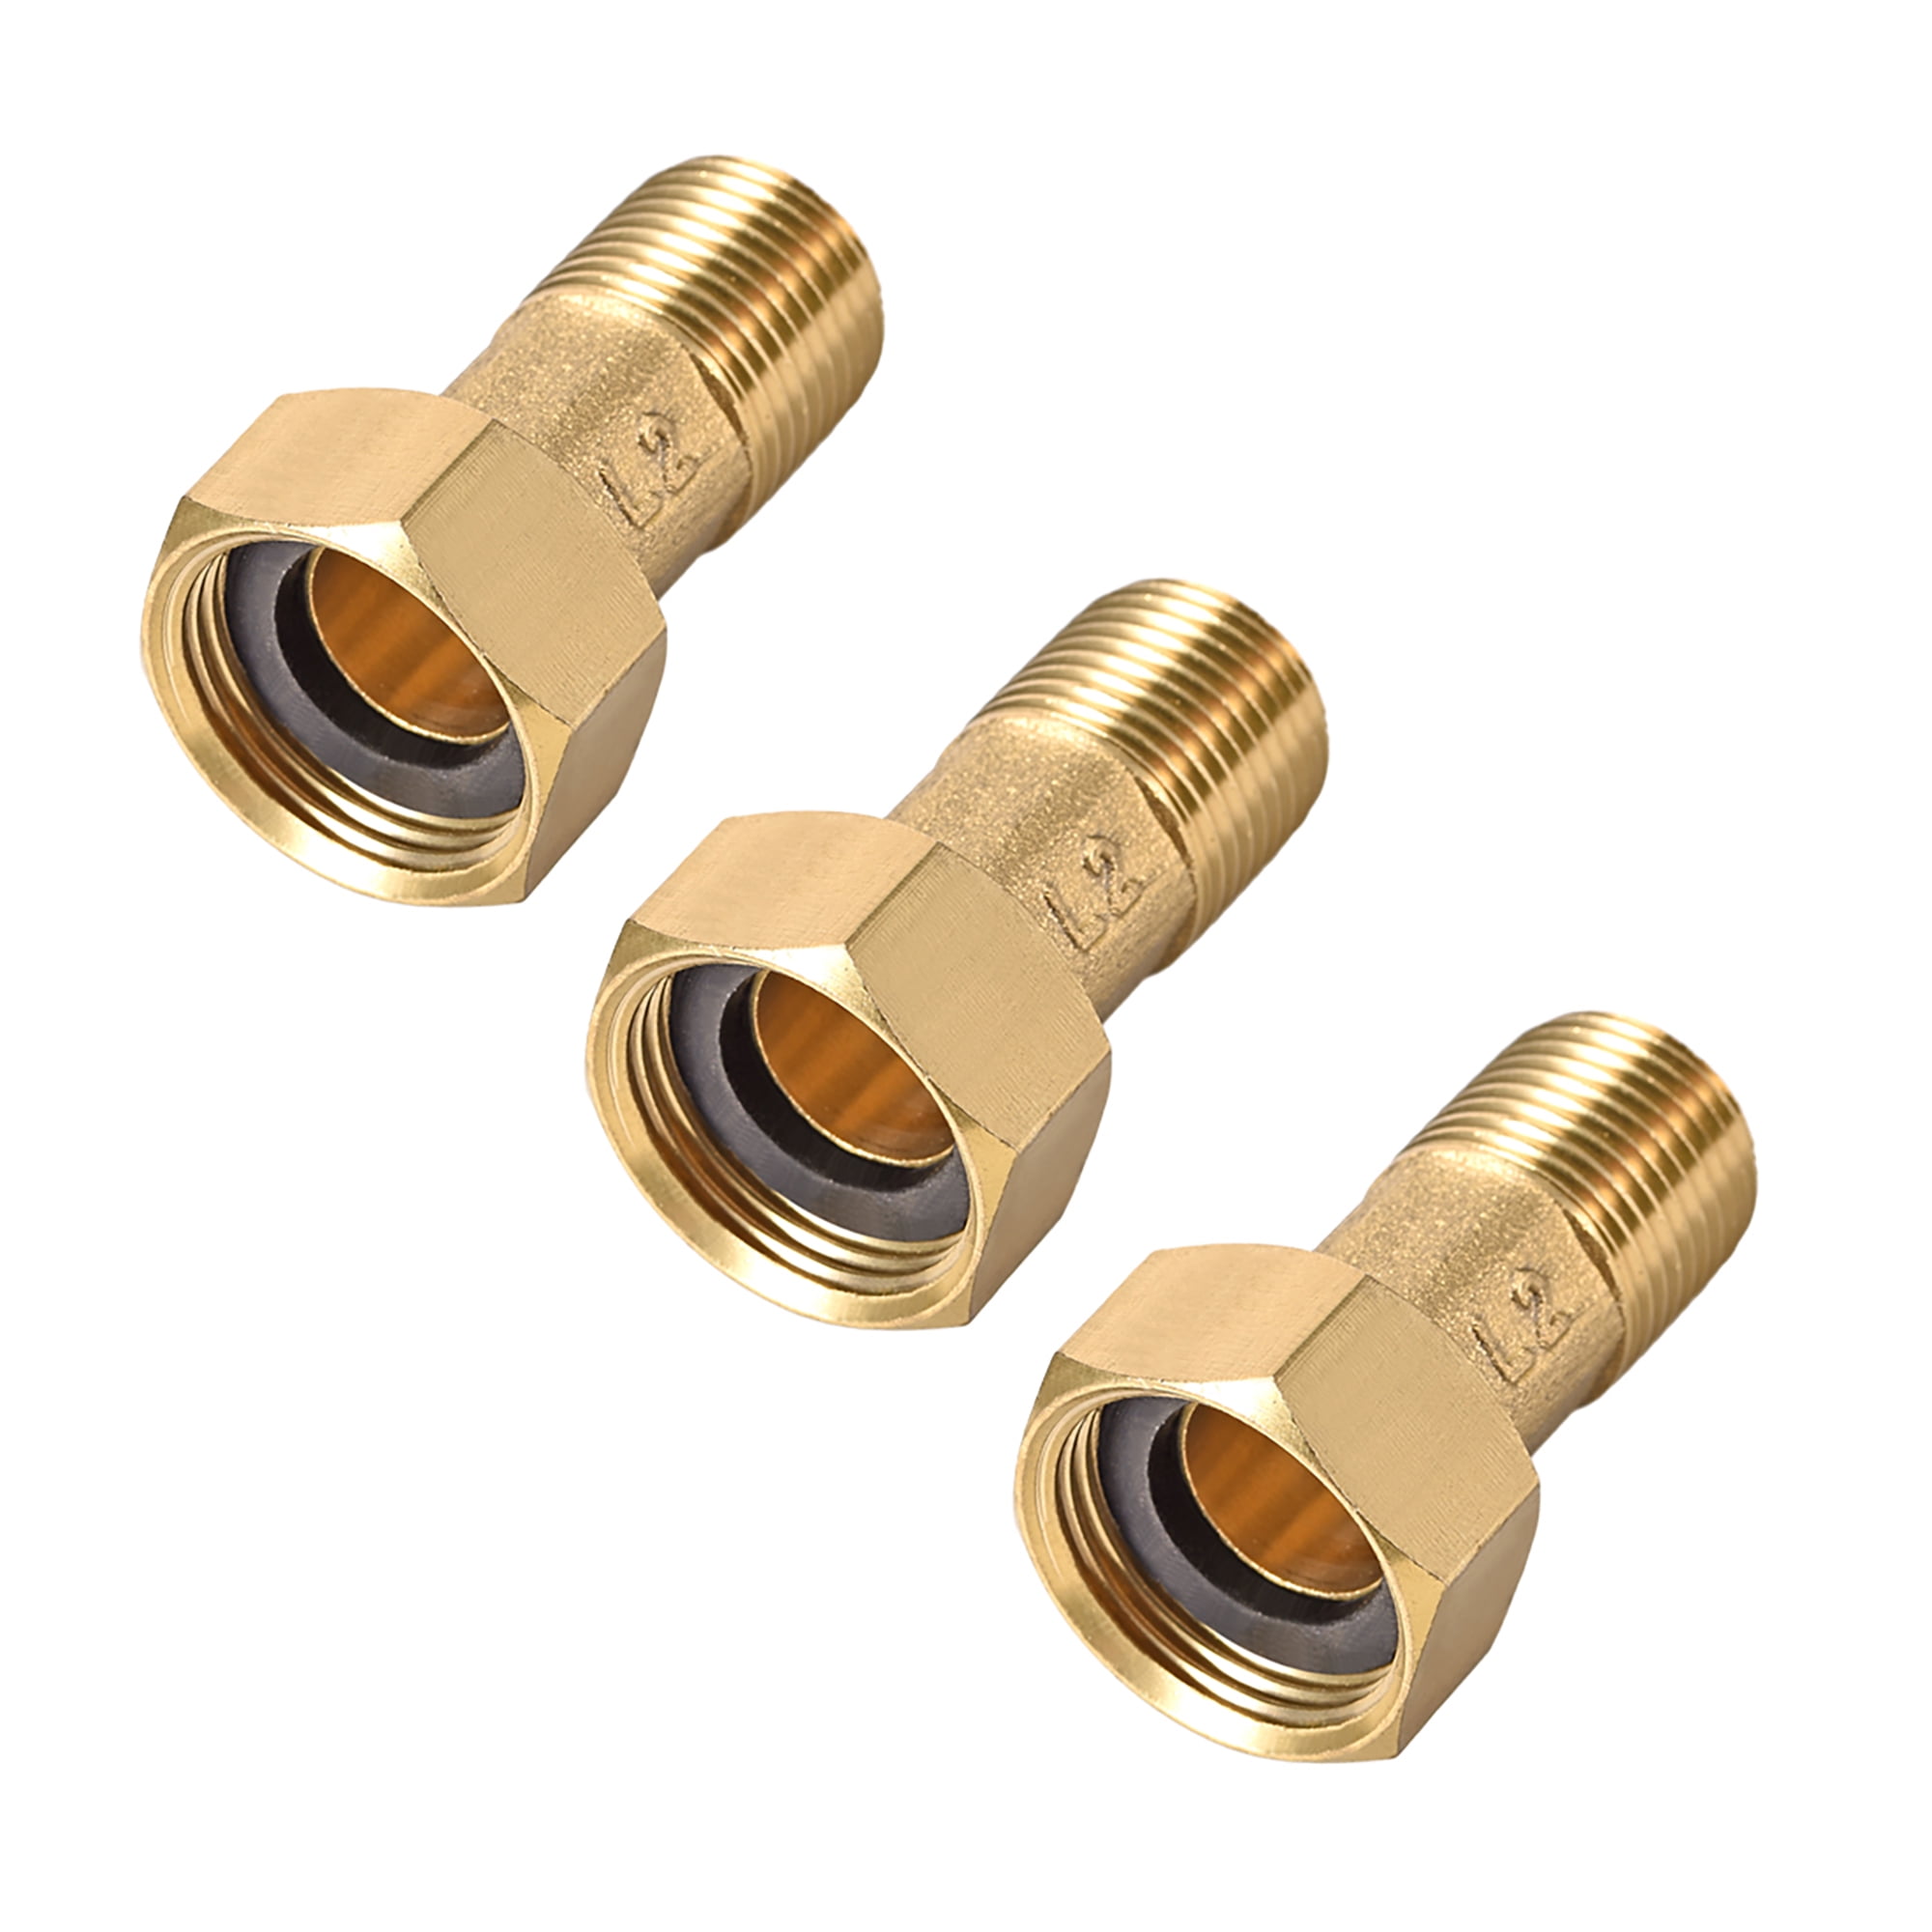 Full Brass G1/2" Male x G1/2" Female Thread Adapter Connector Pipe Fitting 